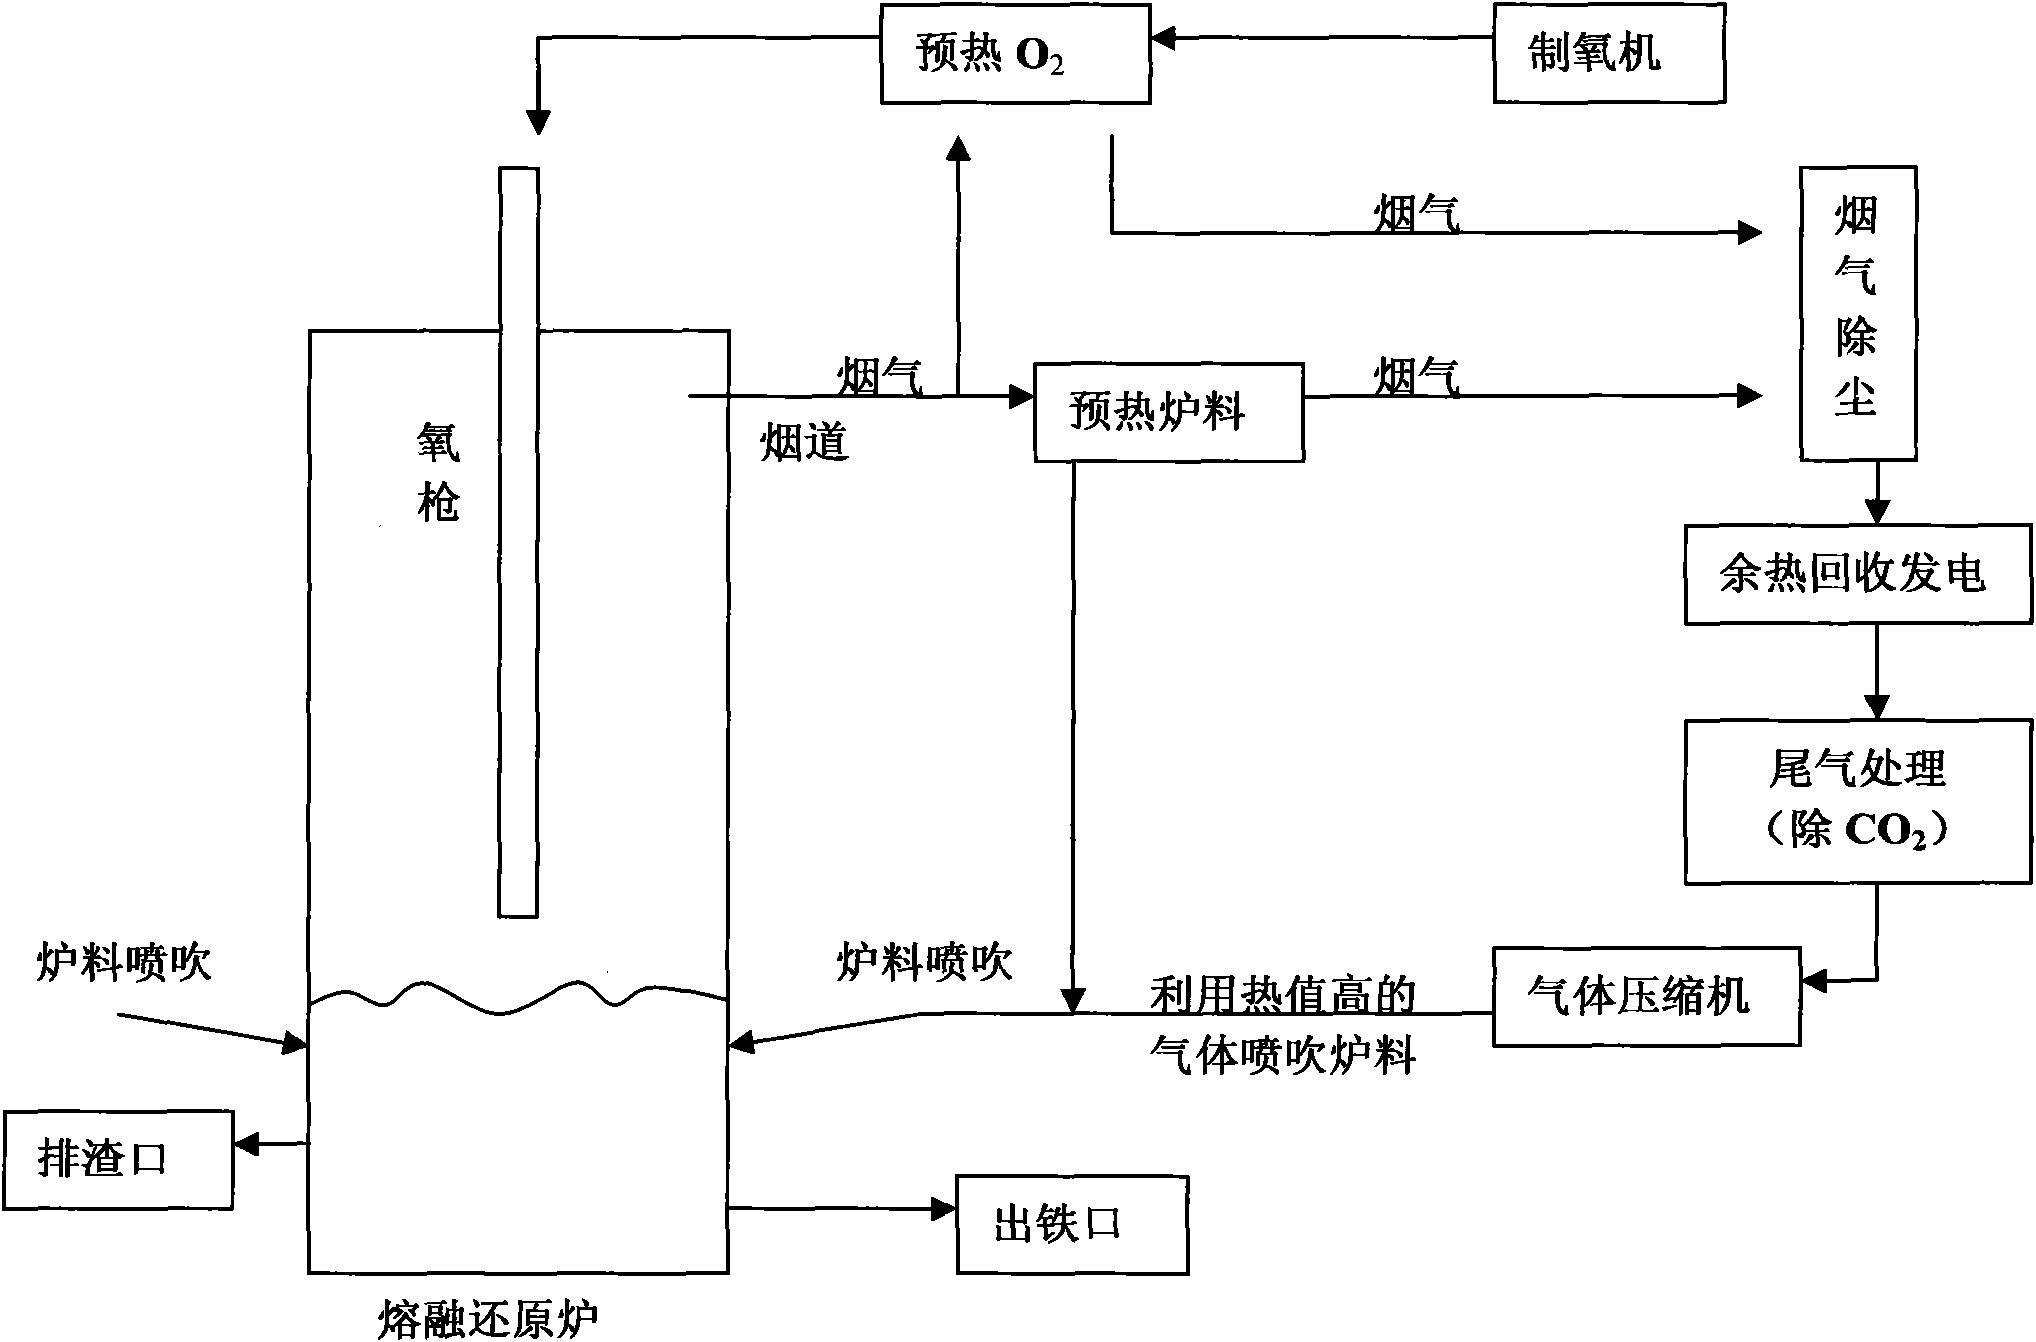 Method for melting, reducing and smelting high-titanium iron ore by oxygen-enriched top blowing